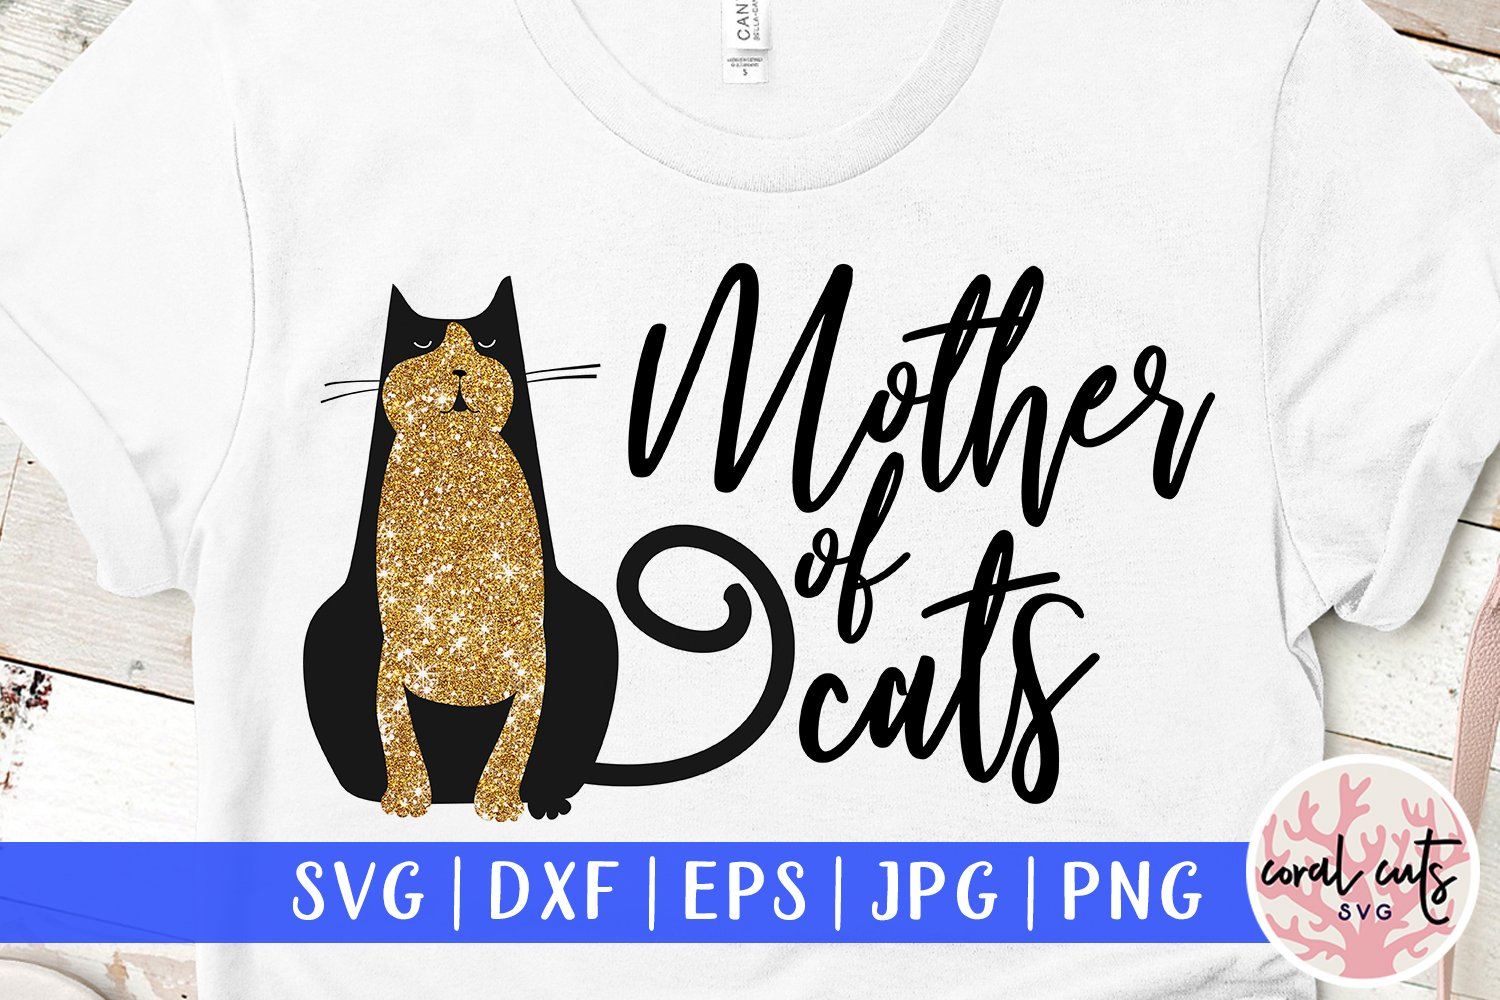 Download Mother Of Cats So Fontsy